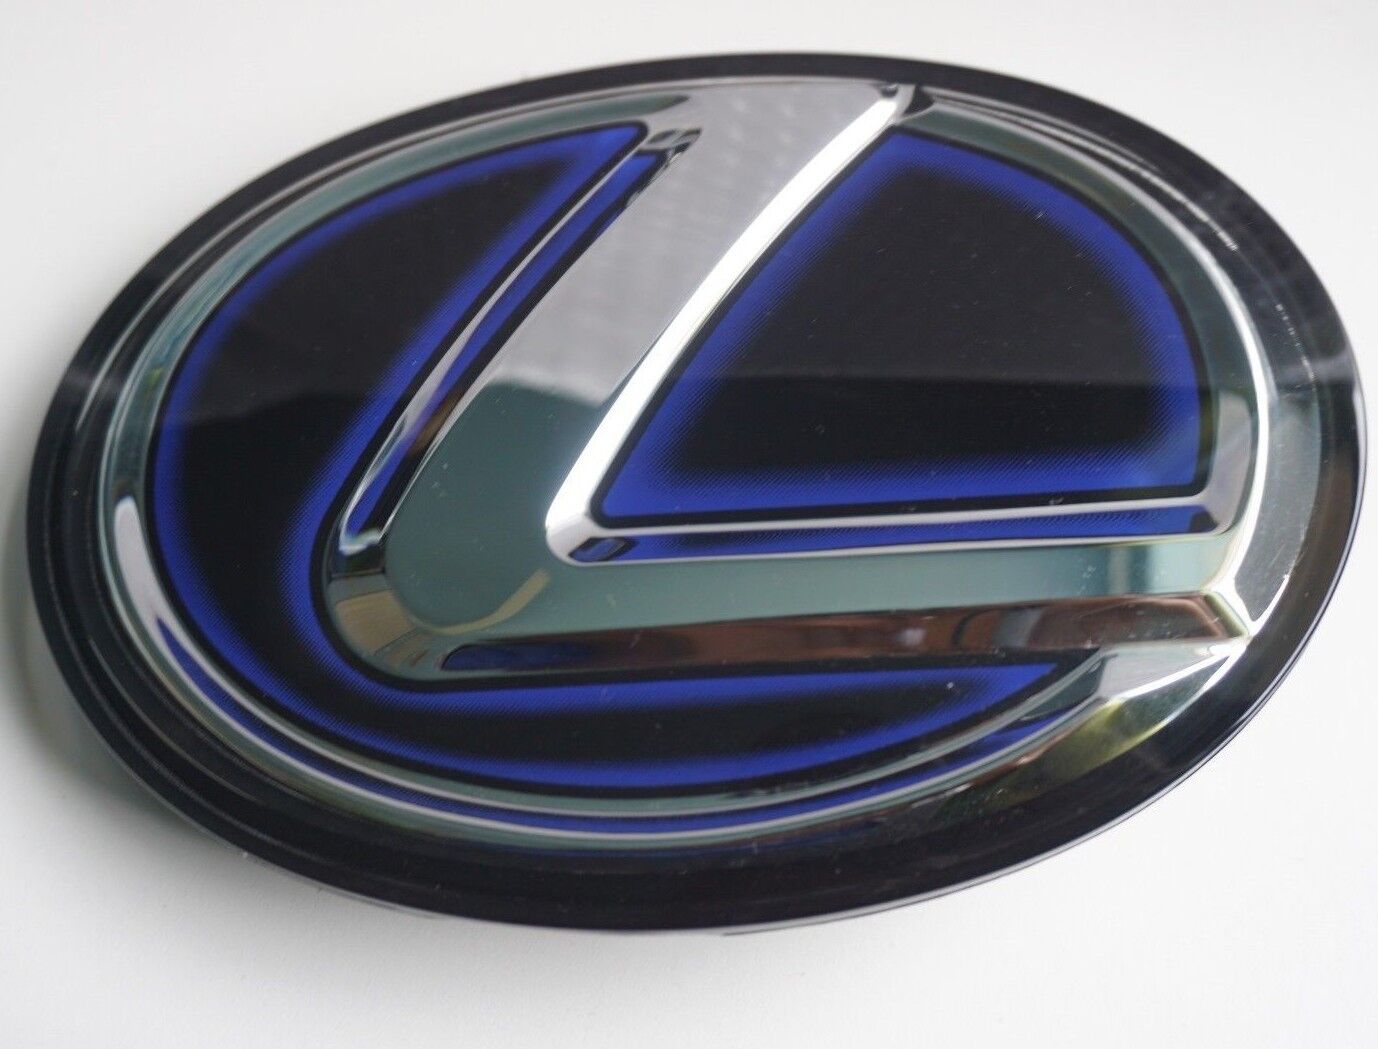 NEW Blue For Lexus Emblem Front Grille Grill Logo F SPORT IS250 GS350 Hybrid NX